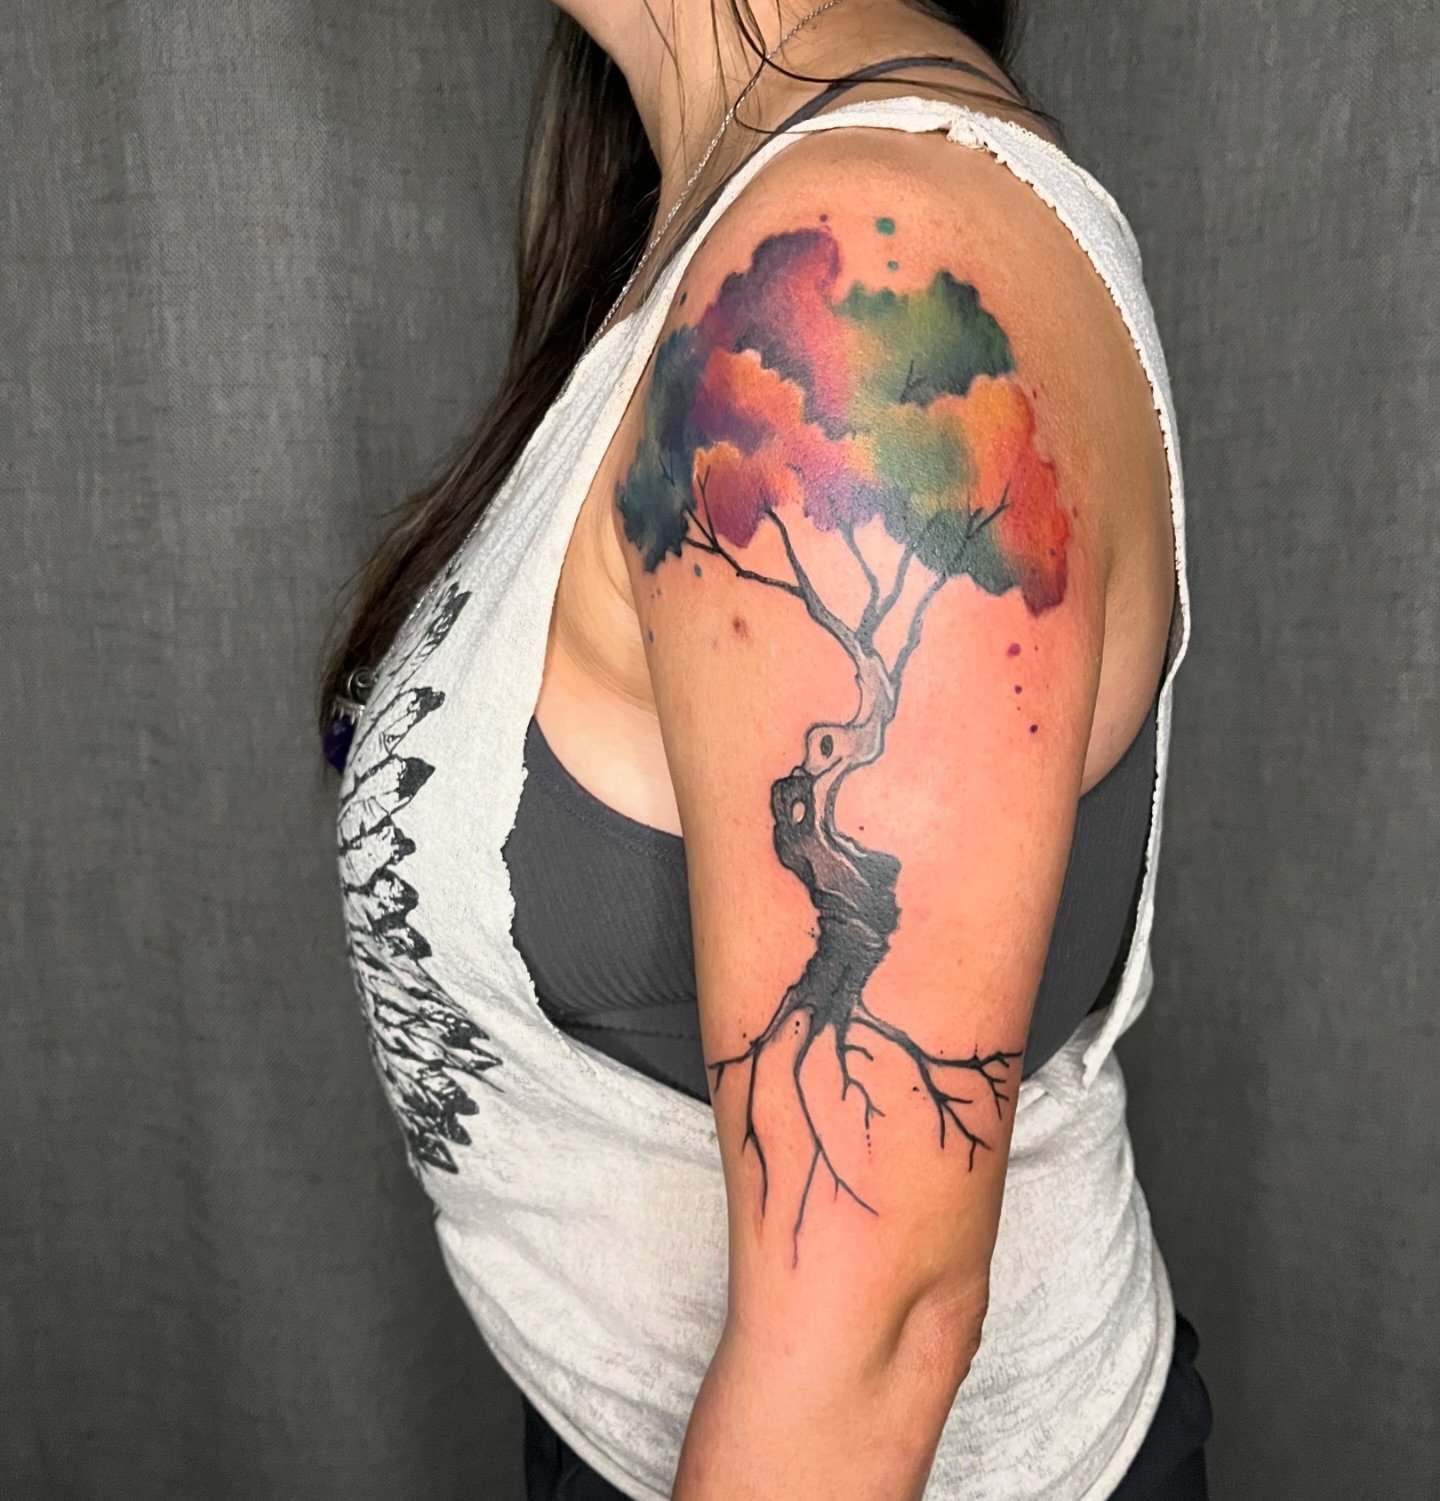 Allison gave me this 4 seasons tree idea for her tattoo. The concept of the yin yang trunk is balance. The season represent changes in life. The roots are a symbol of stability. 

#treetattoos #watercolortattoo #nashvilletattooartist #nashvilletattoo